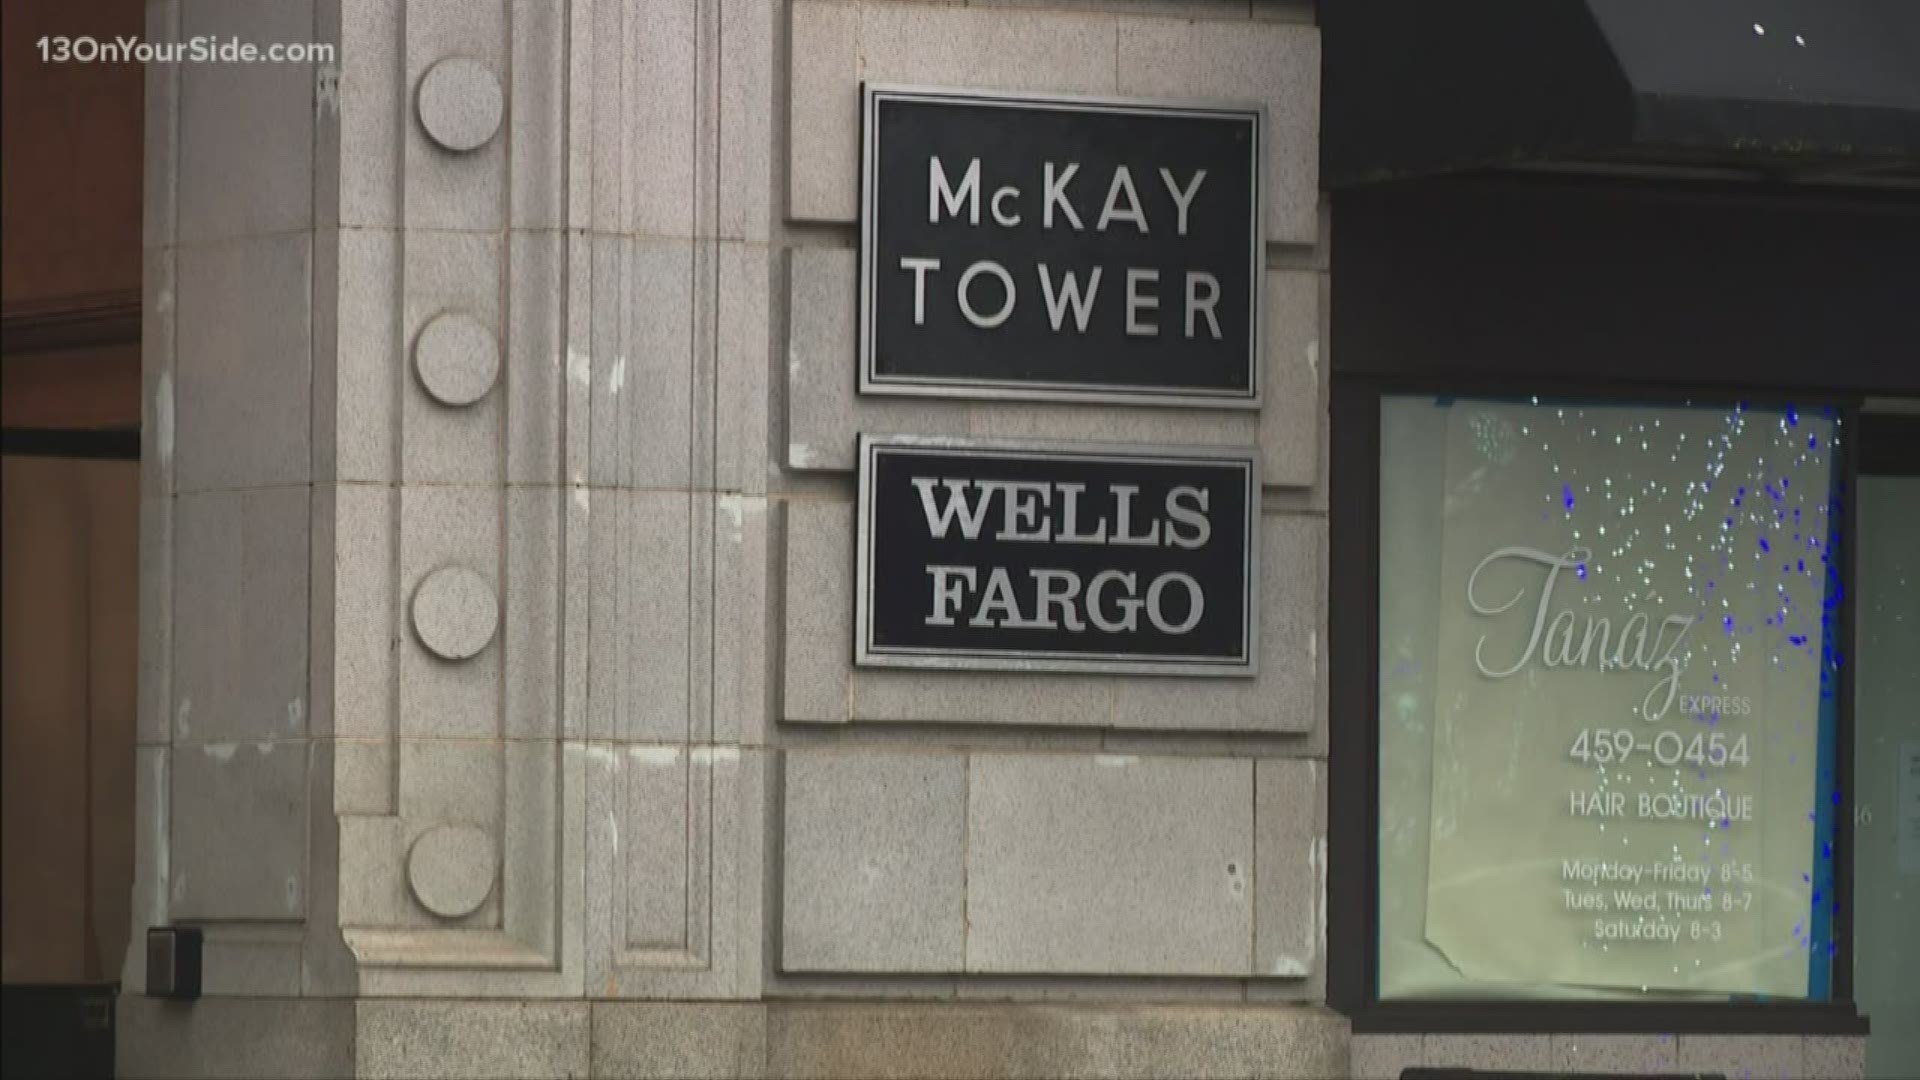 Two 100 percent tribally-owned investment companies announced their joint venture to buy the McKay Tower in downtown Grand Rapids Wednesday.